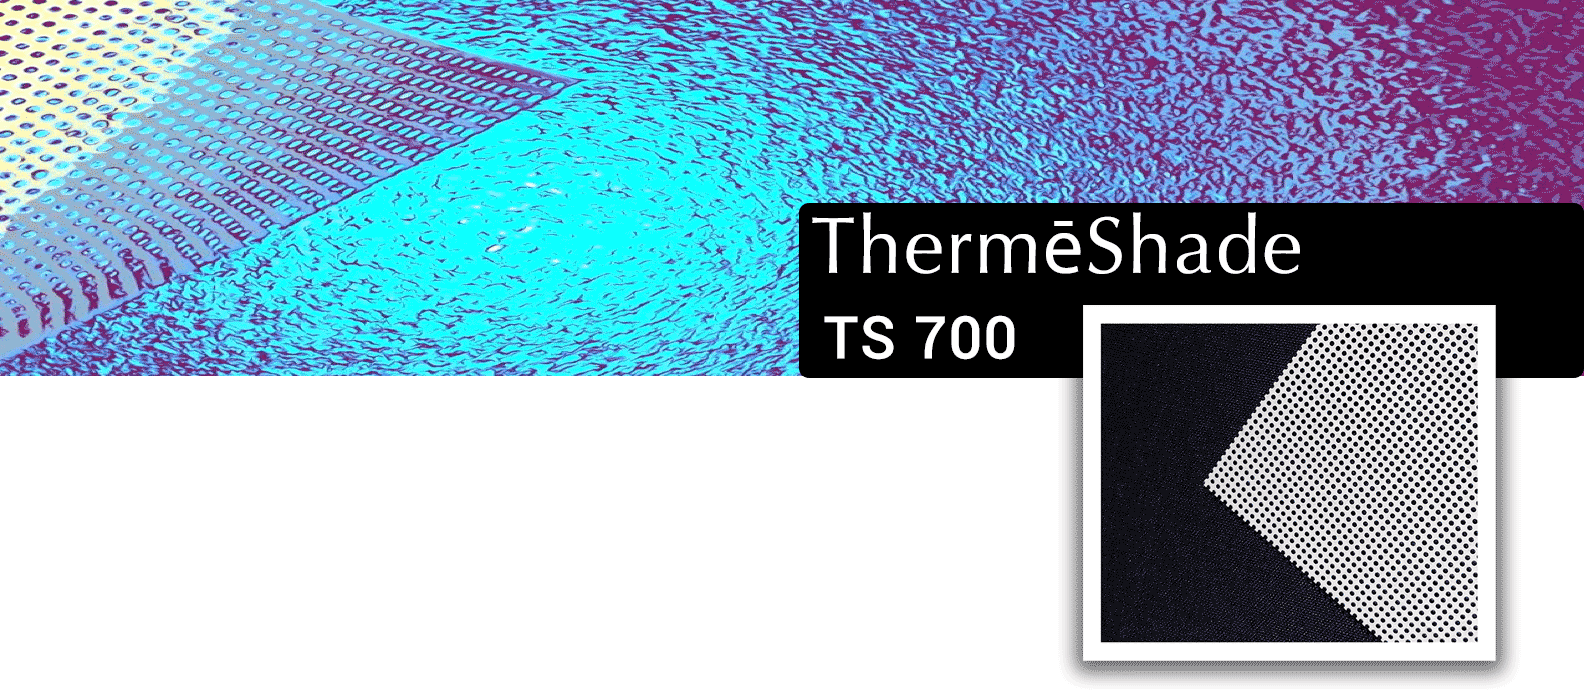 thermshade setion header